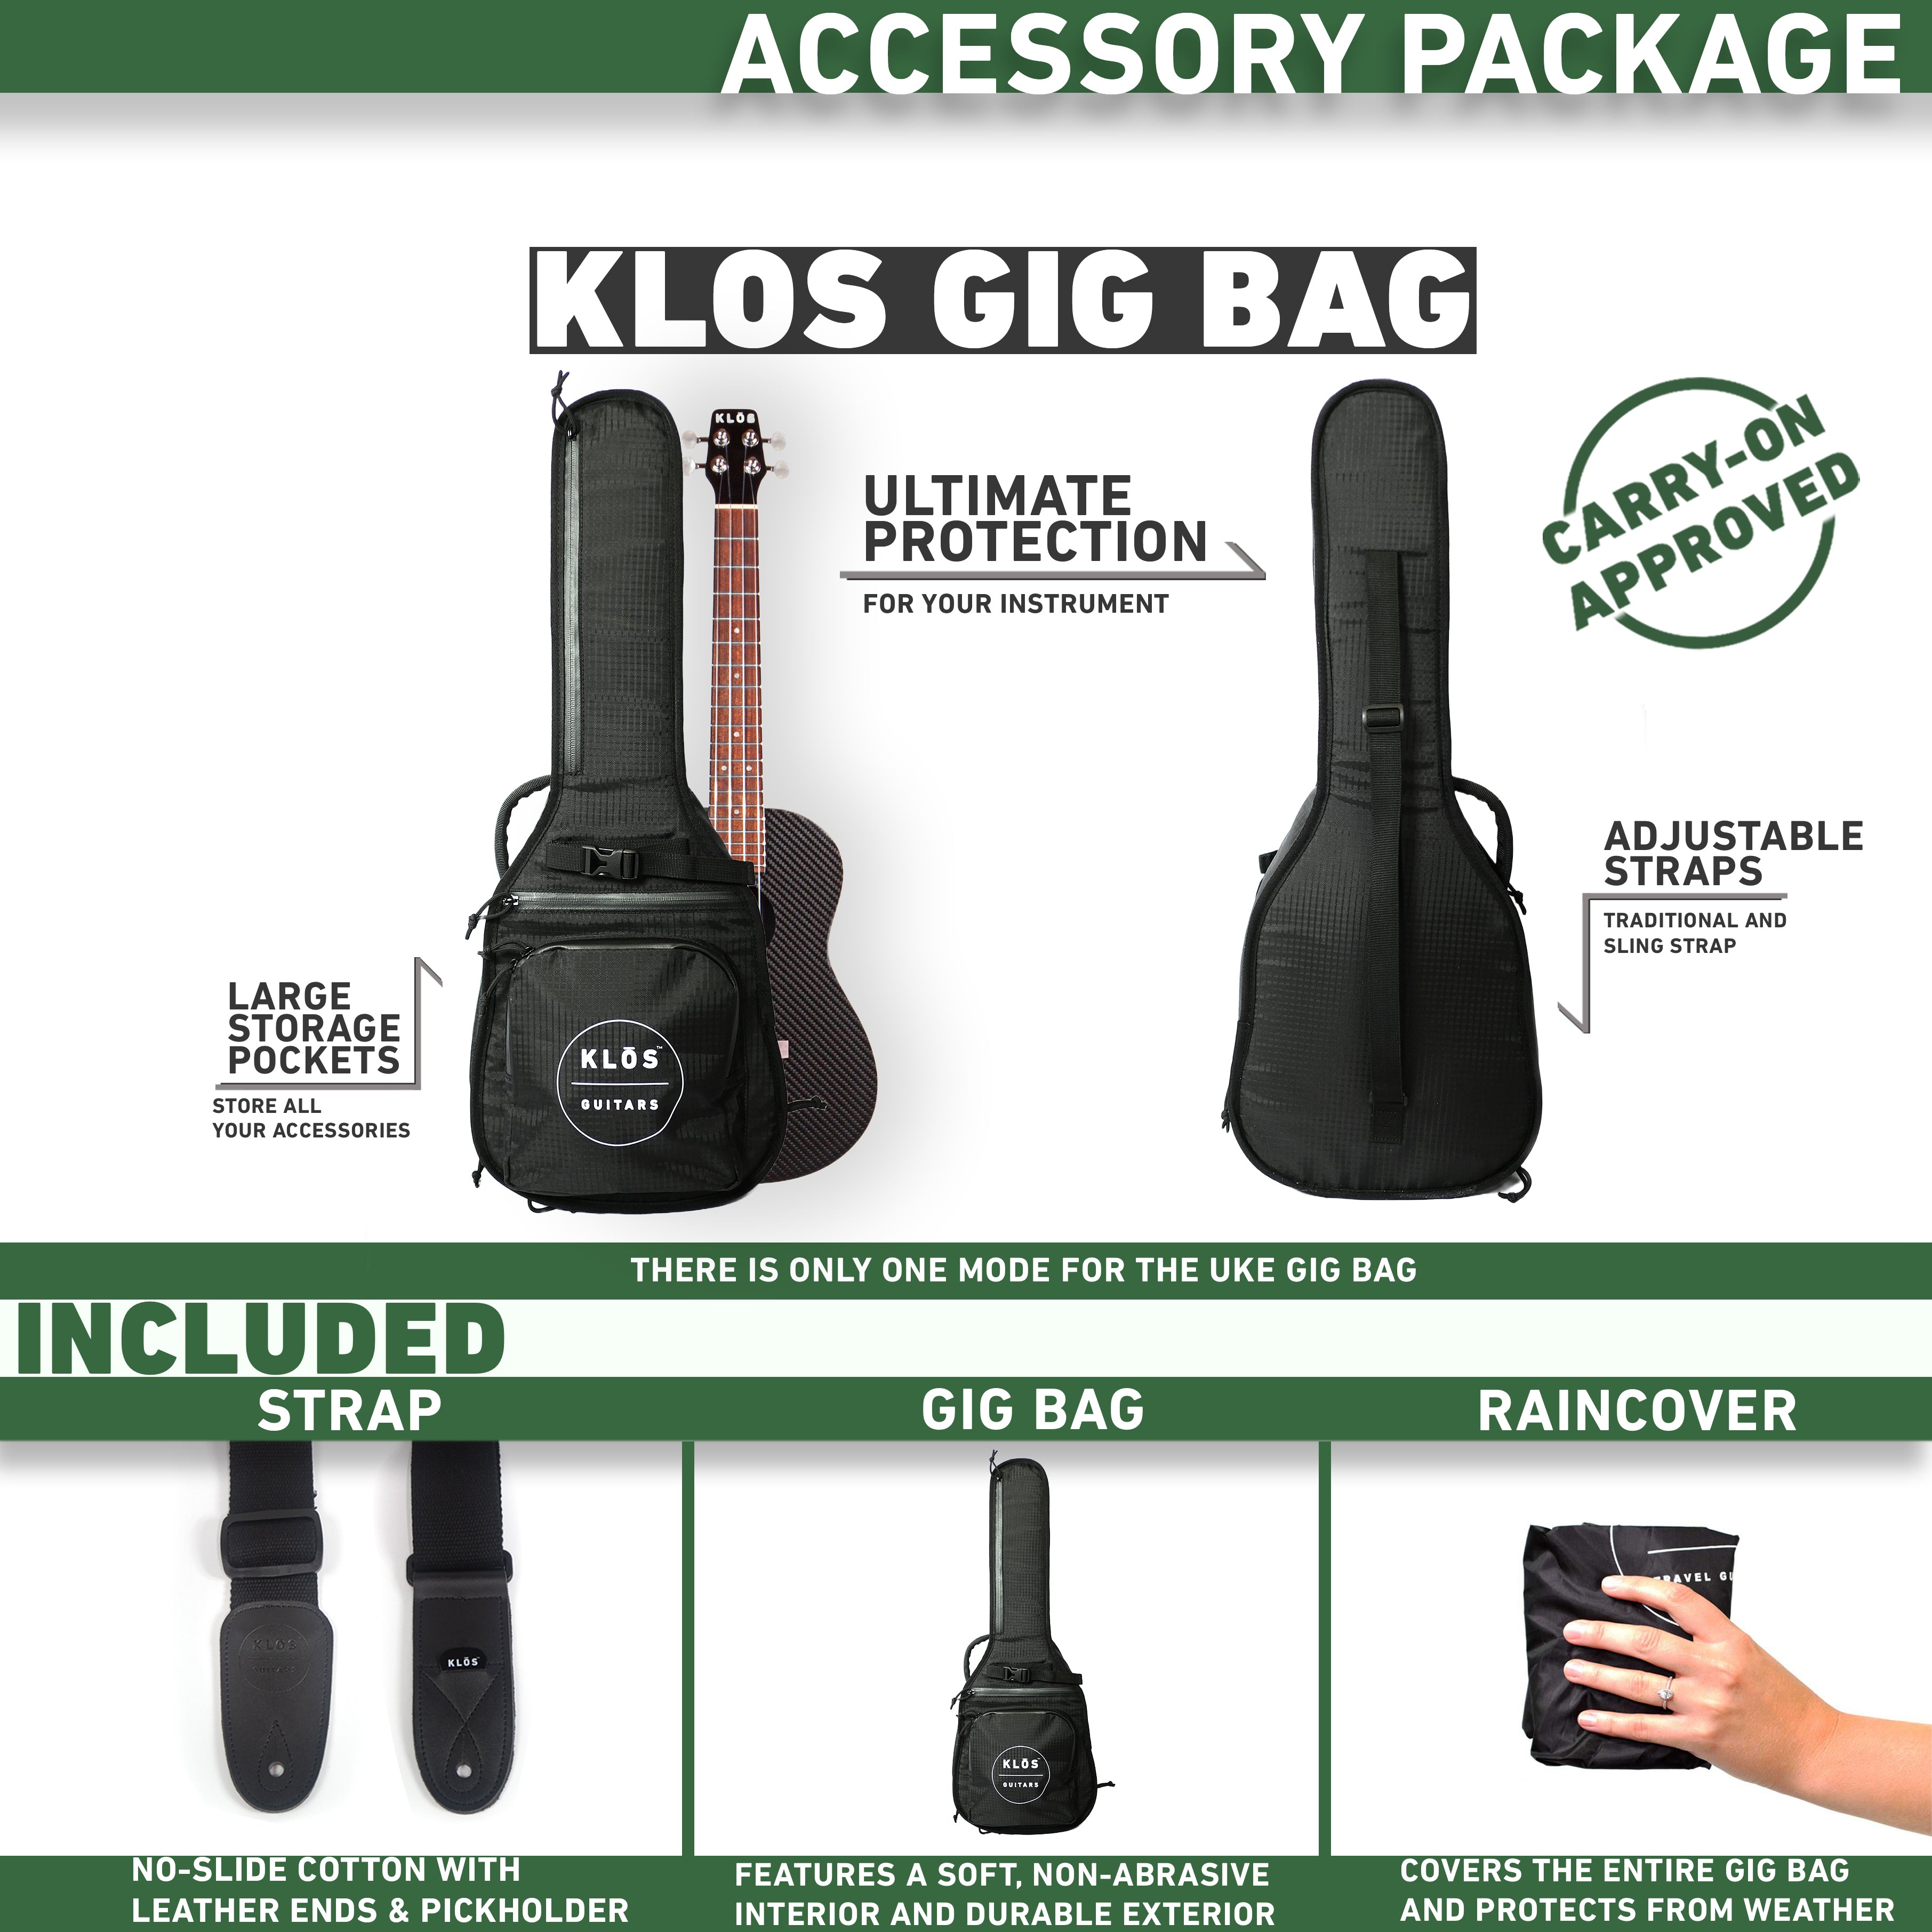 Gig bag highlights. Carry-on approved. Accessory bundle. 